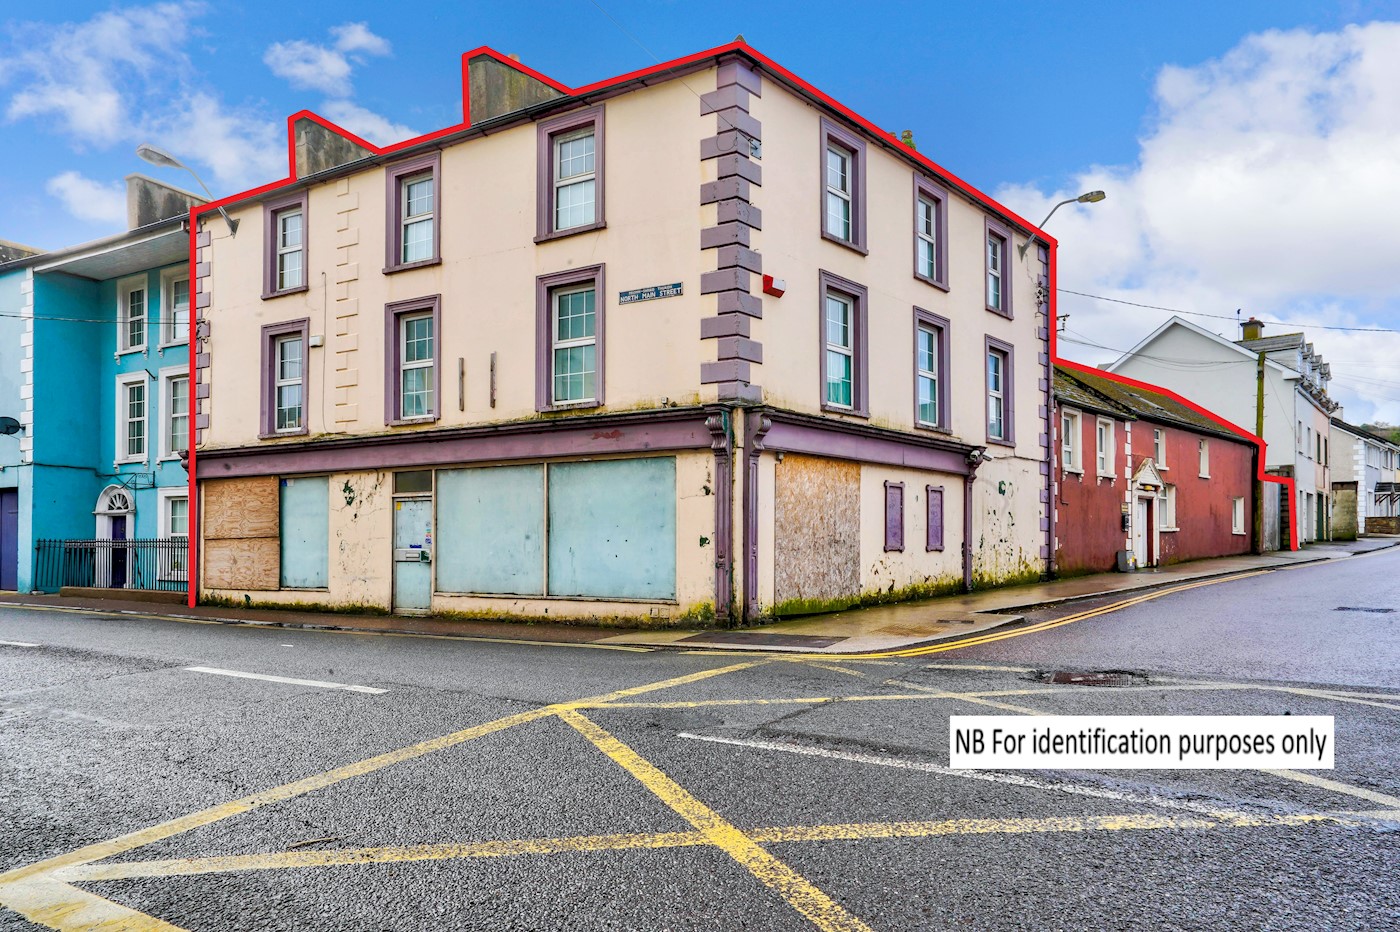 1-2 North Main Street, Youghal, Co. Cork, P36 WK02 1/13